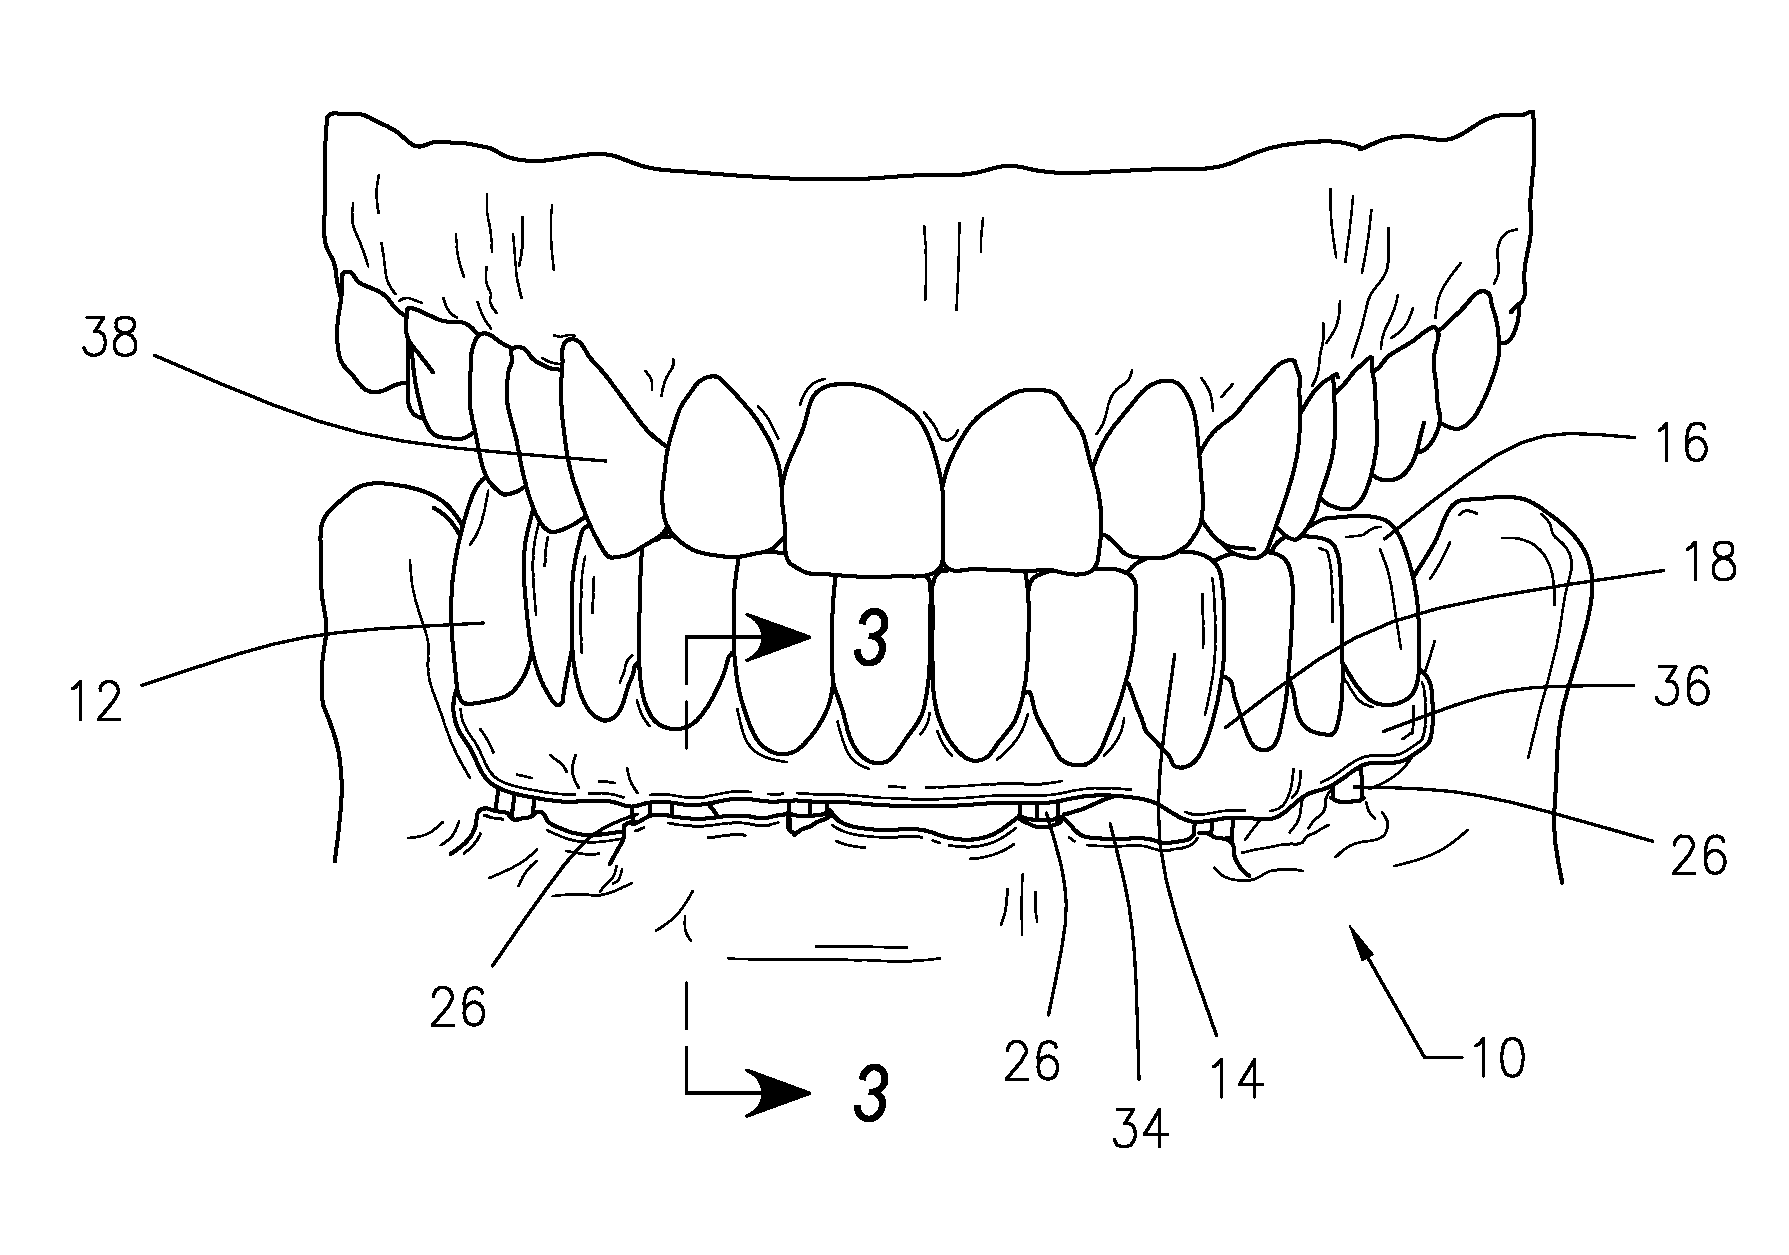 Fixed, Implant-Supported, Full Arch Dental Prosthetics and Methods of Seating Thereof